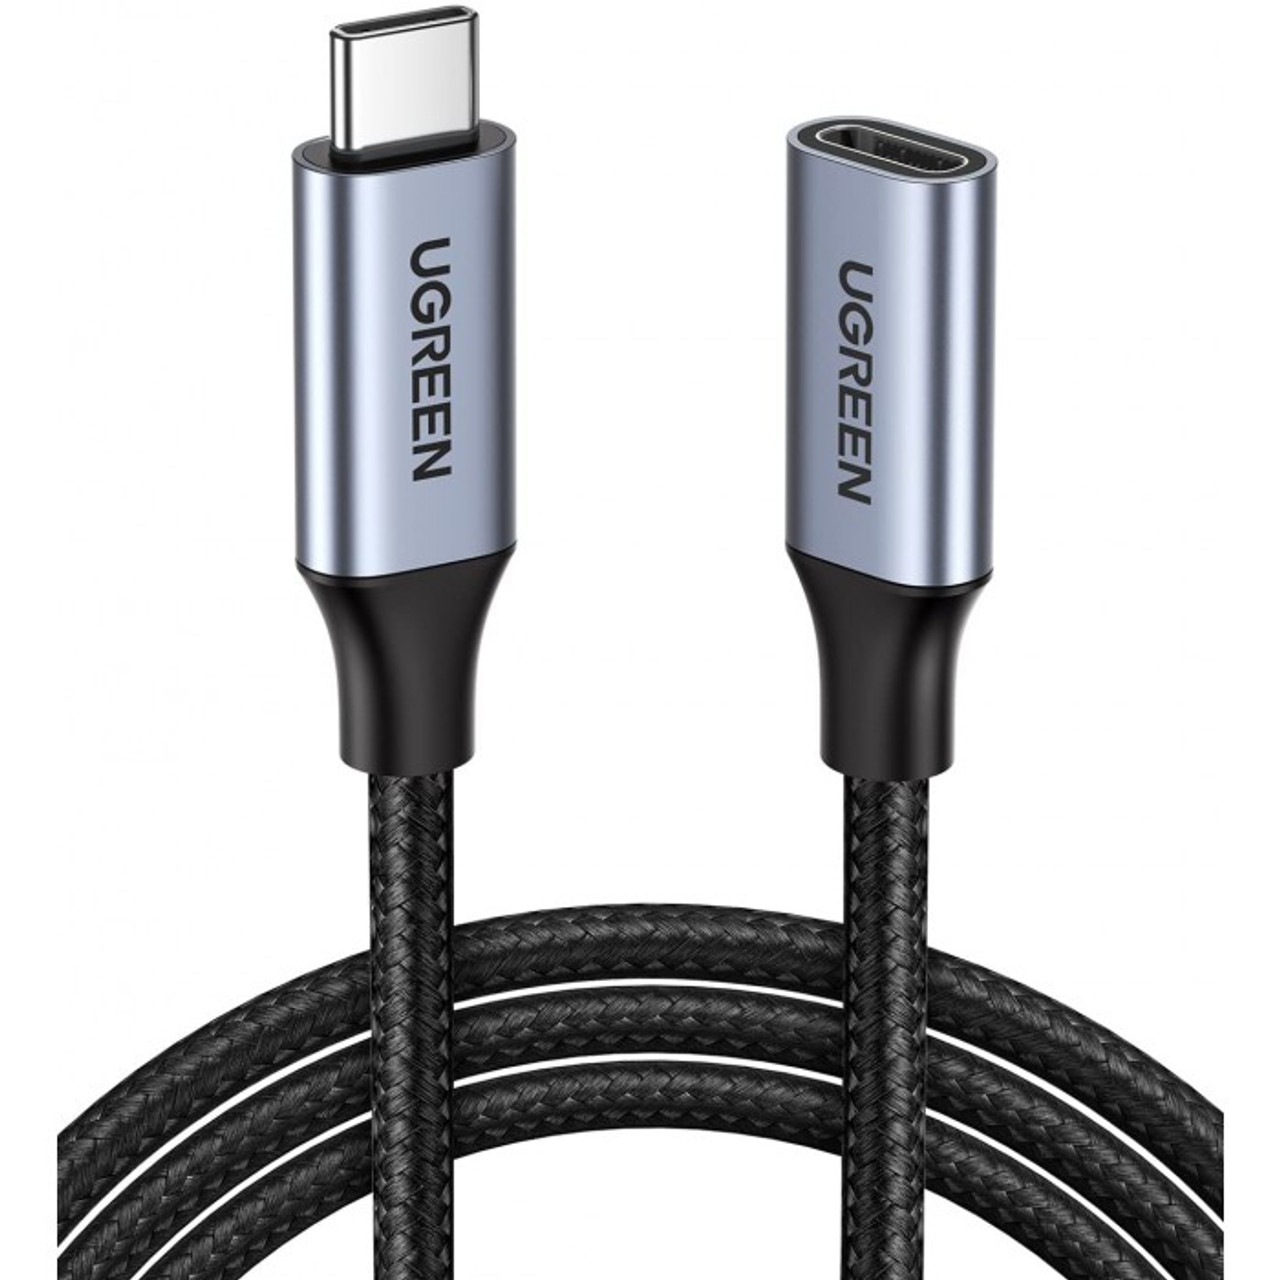 UGreen USB-C  Cable Extension Male to Female & thunderbolt 3  Compatibility | US372 | 30205 | AYOUB COMPUTERS | LEBANON